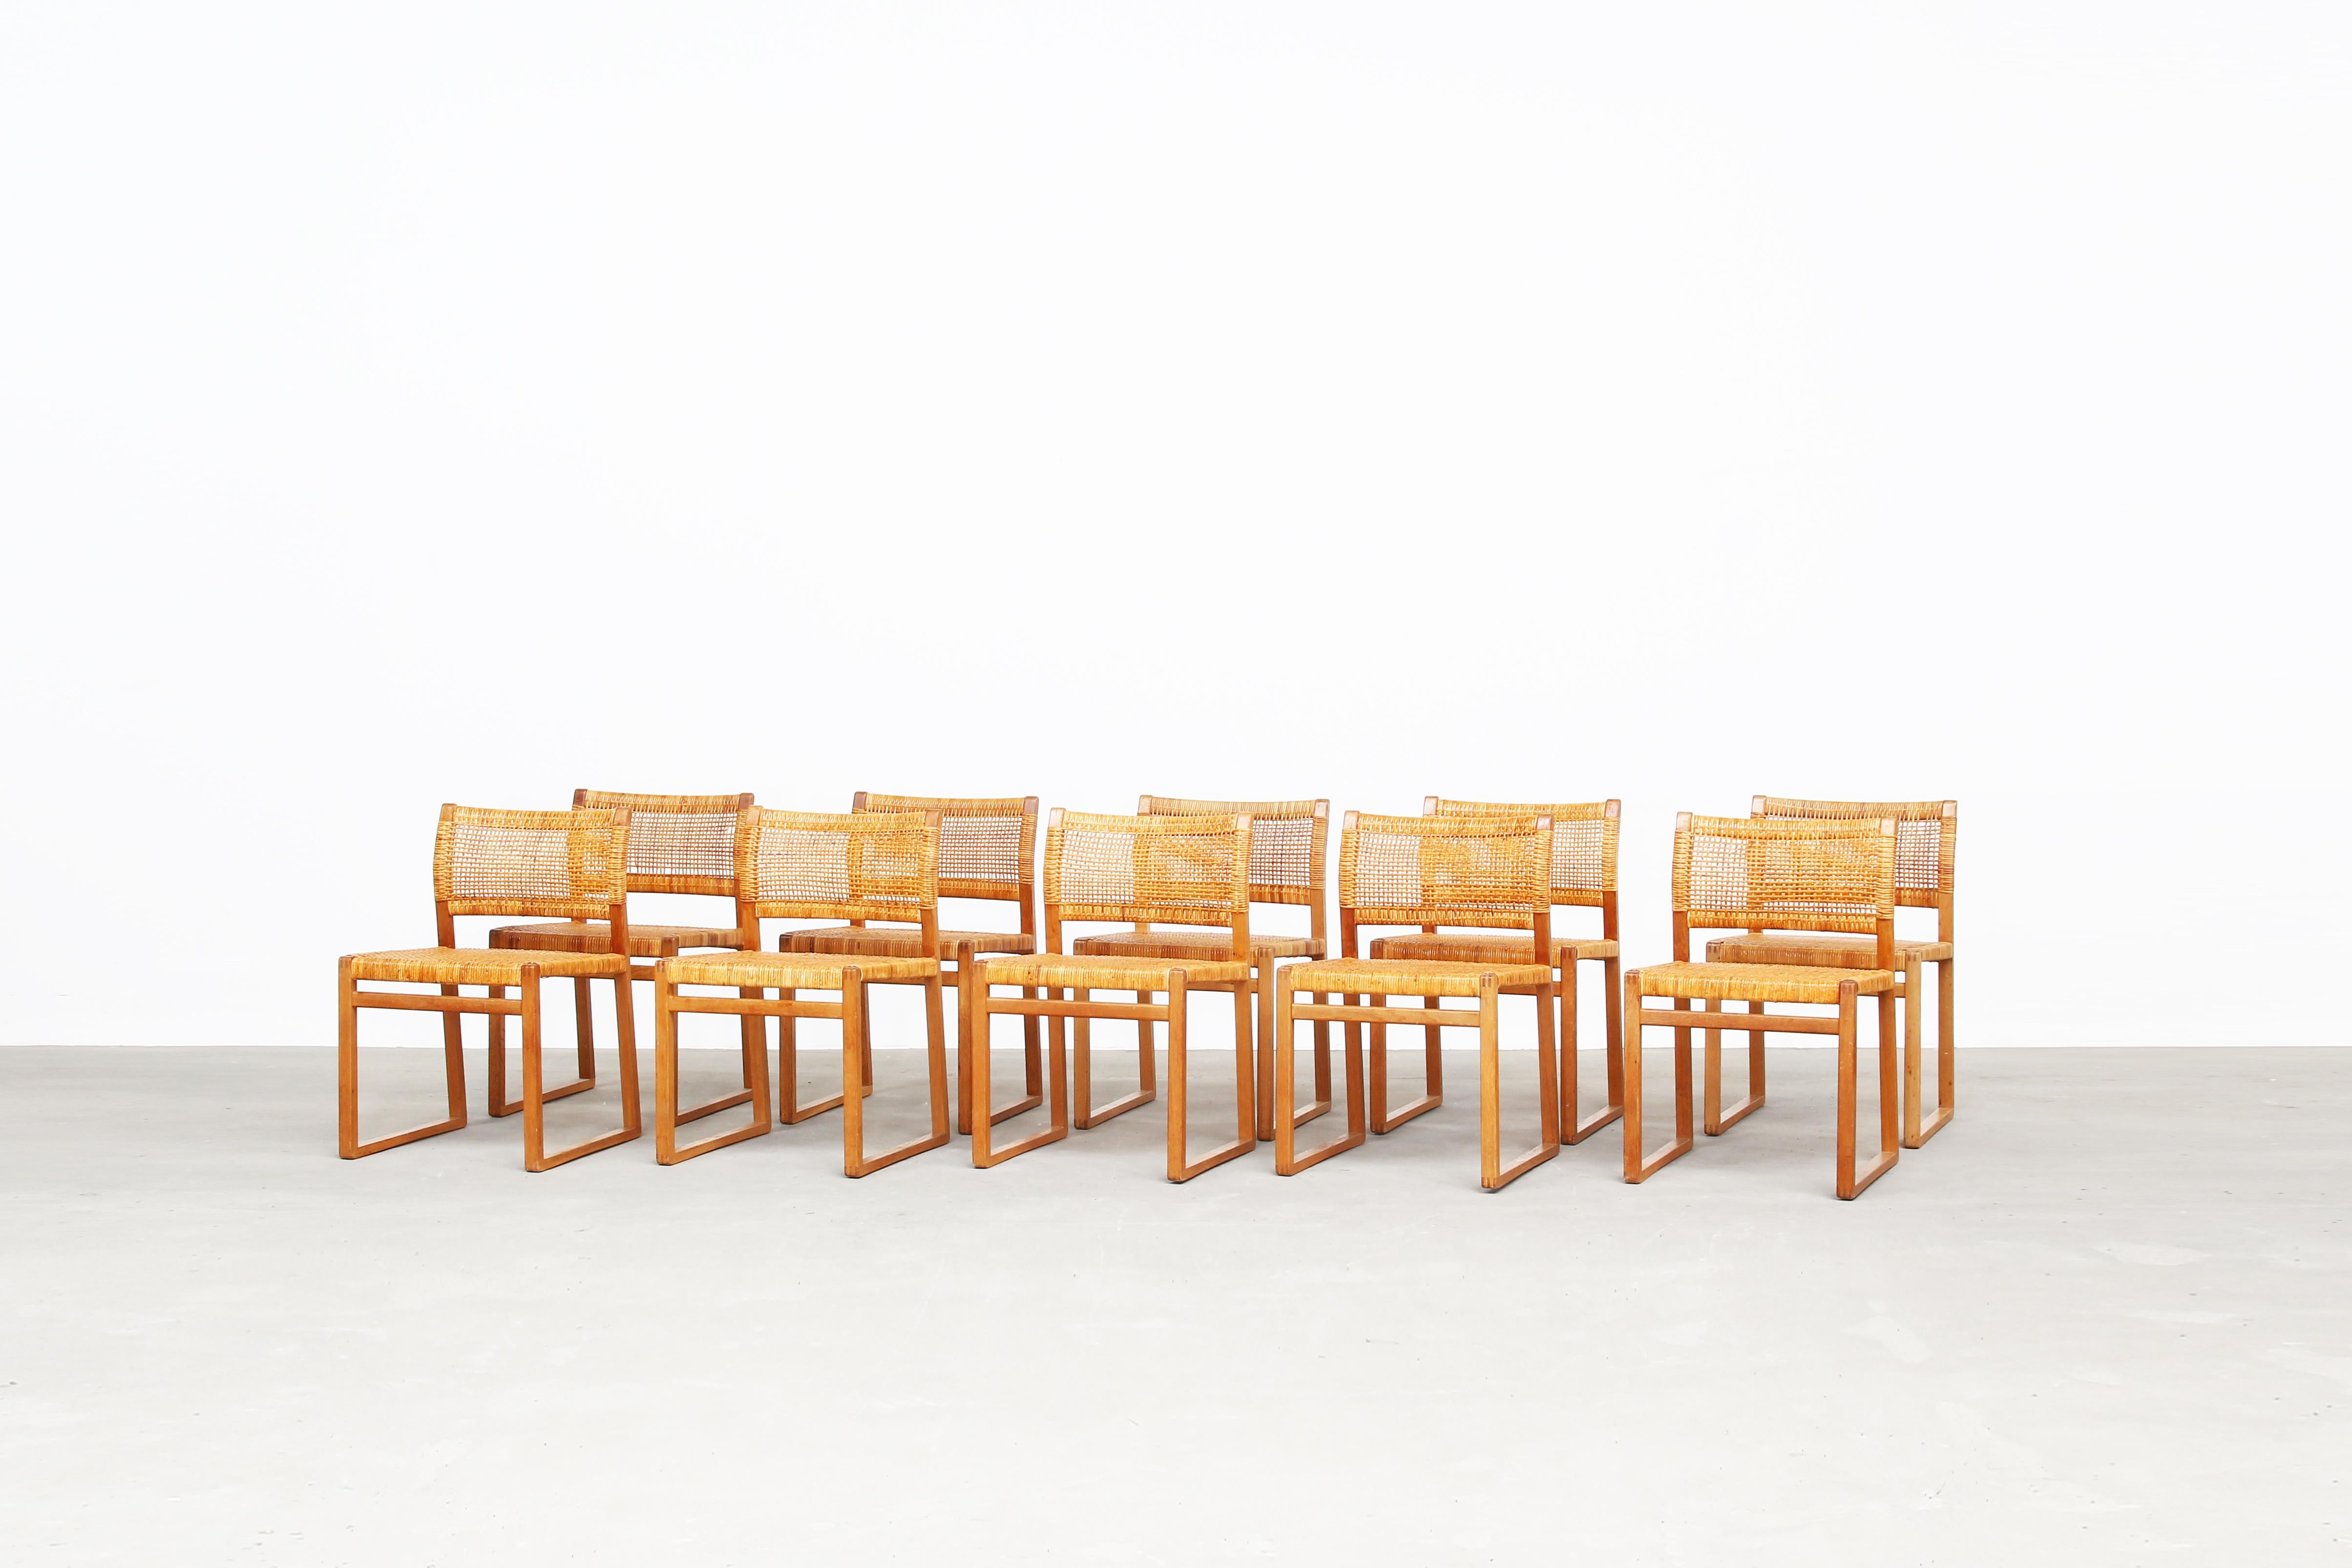 A very beautiful set of 12 dining chairs Mod. BM 61 designed by Børge Mogensen for Fredericia Stolefabrik, Denmark. All chairs are in a very good condition with just little traces of usage. The frame made of oak comes in a great patina. The cane is